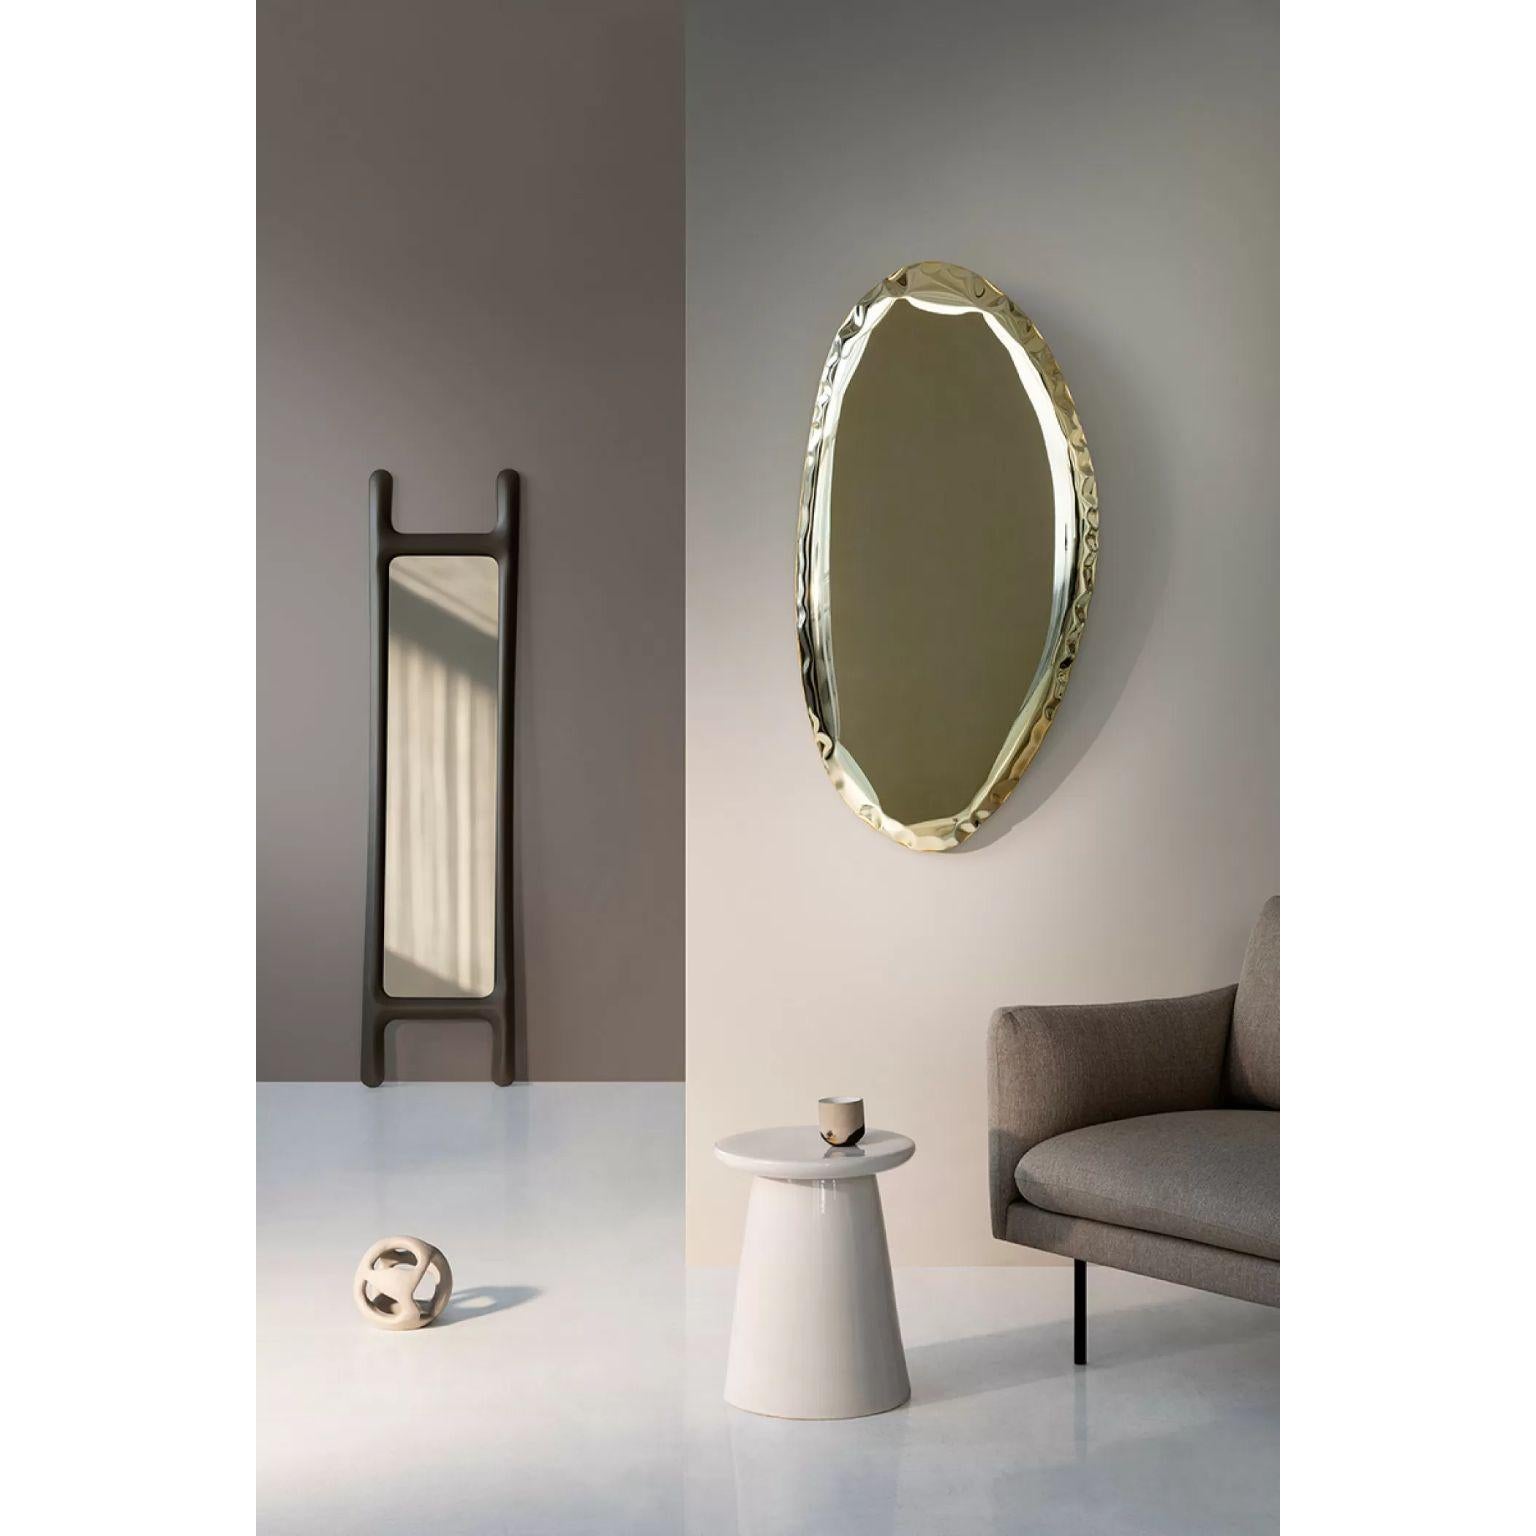 Grey Drab Sculptural Wall Mirror by Zieta
Dimensions: D 6 x W 46 x H 188 cm.
Material: Mirror and carbon steel. 
Finish: Powder-coated in grey.

Also available in different finishes and colors: stainless steel or powder-coated.  Please contact us.